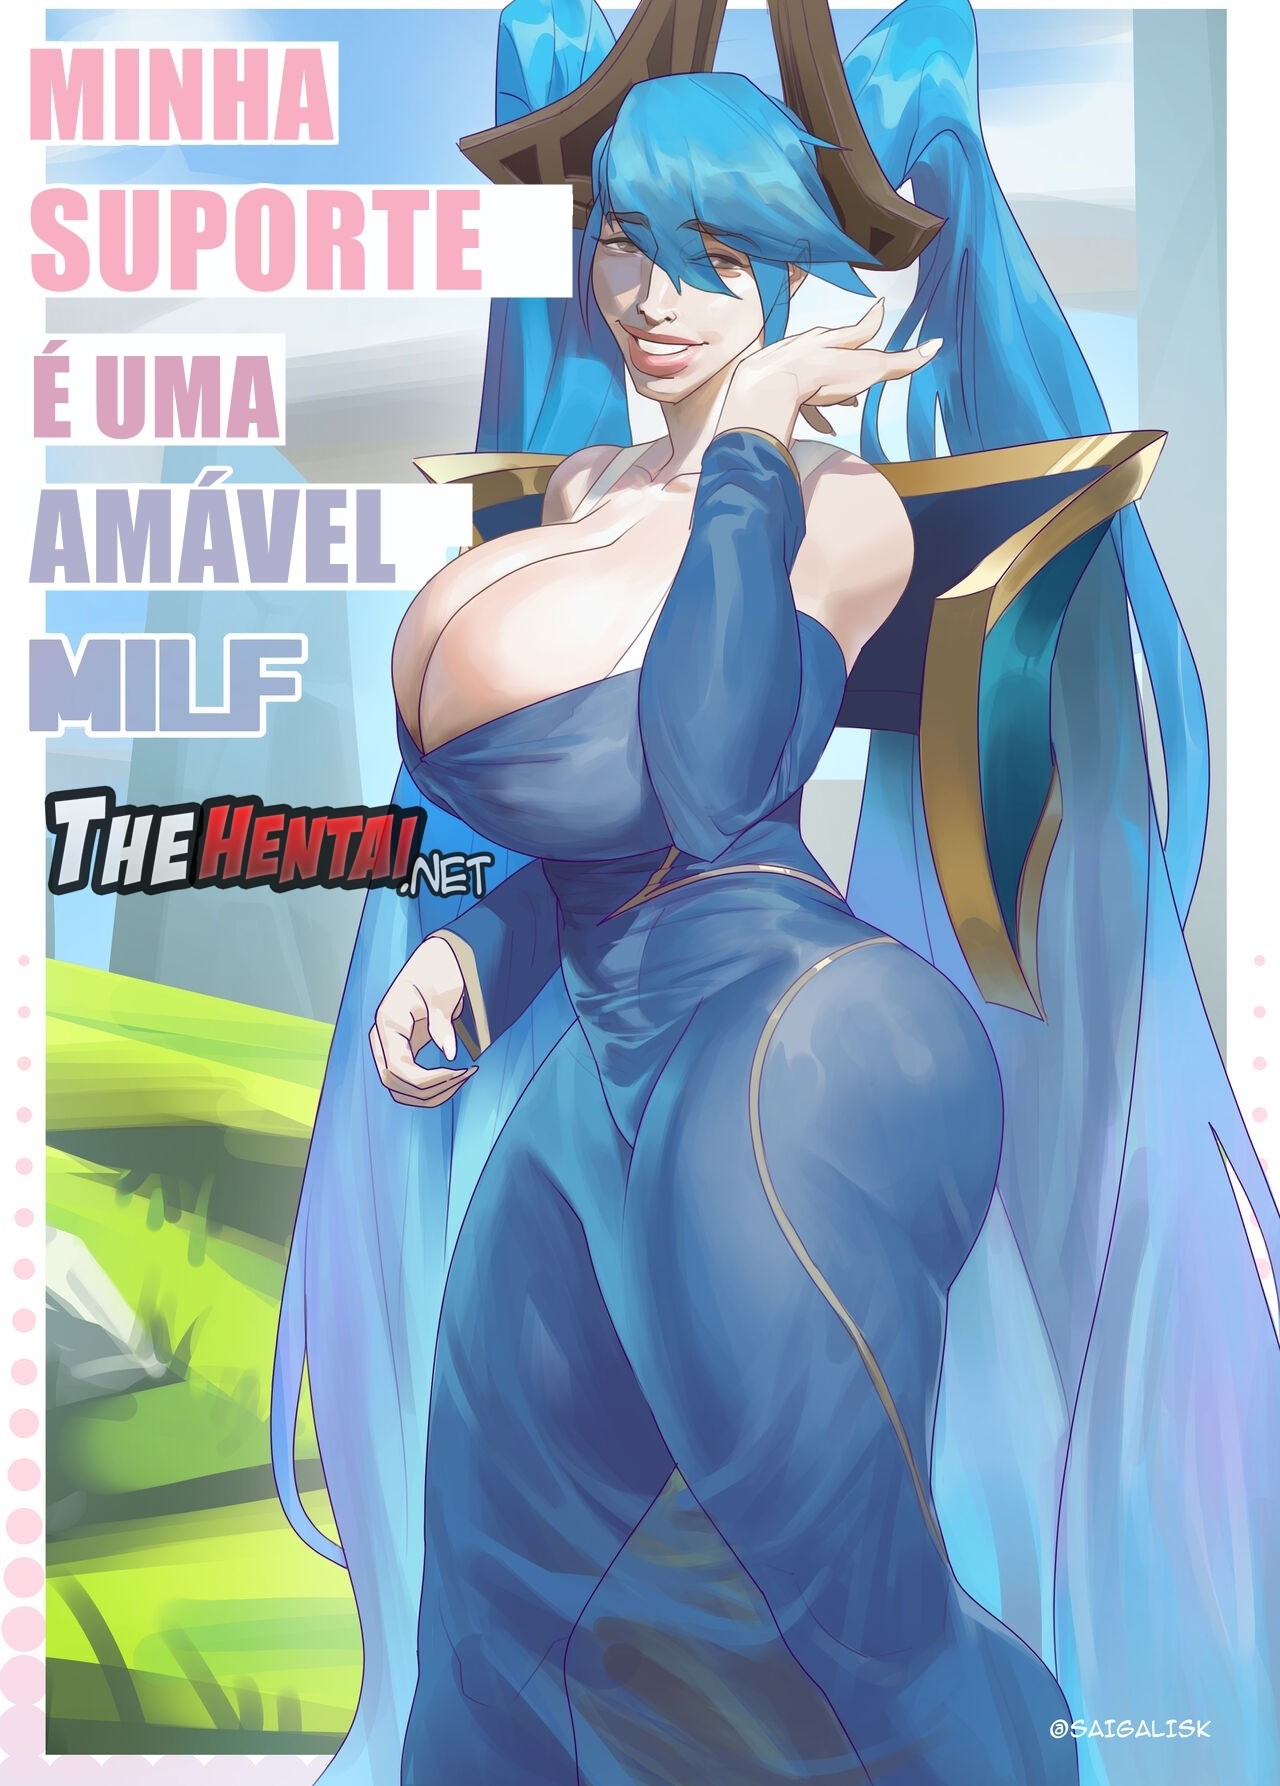 My Support Is a Lovely Milf Hentai pt-br 01